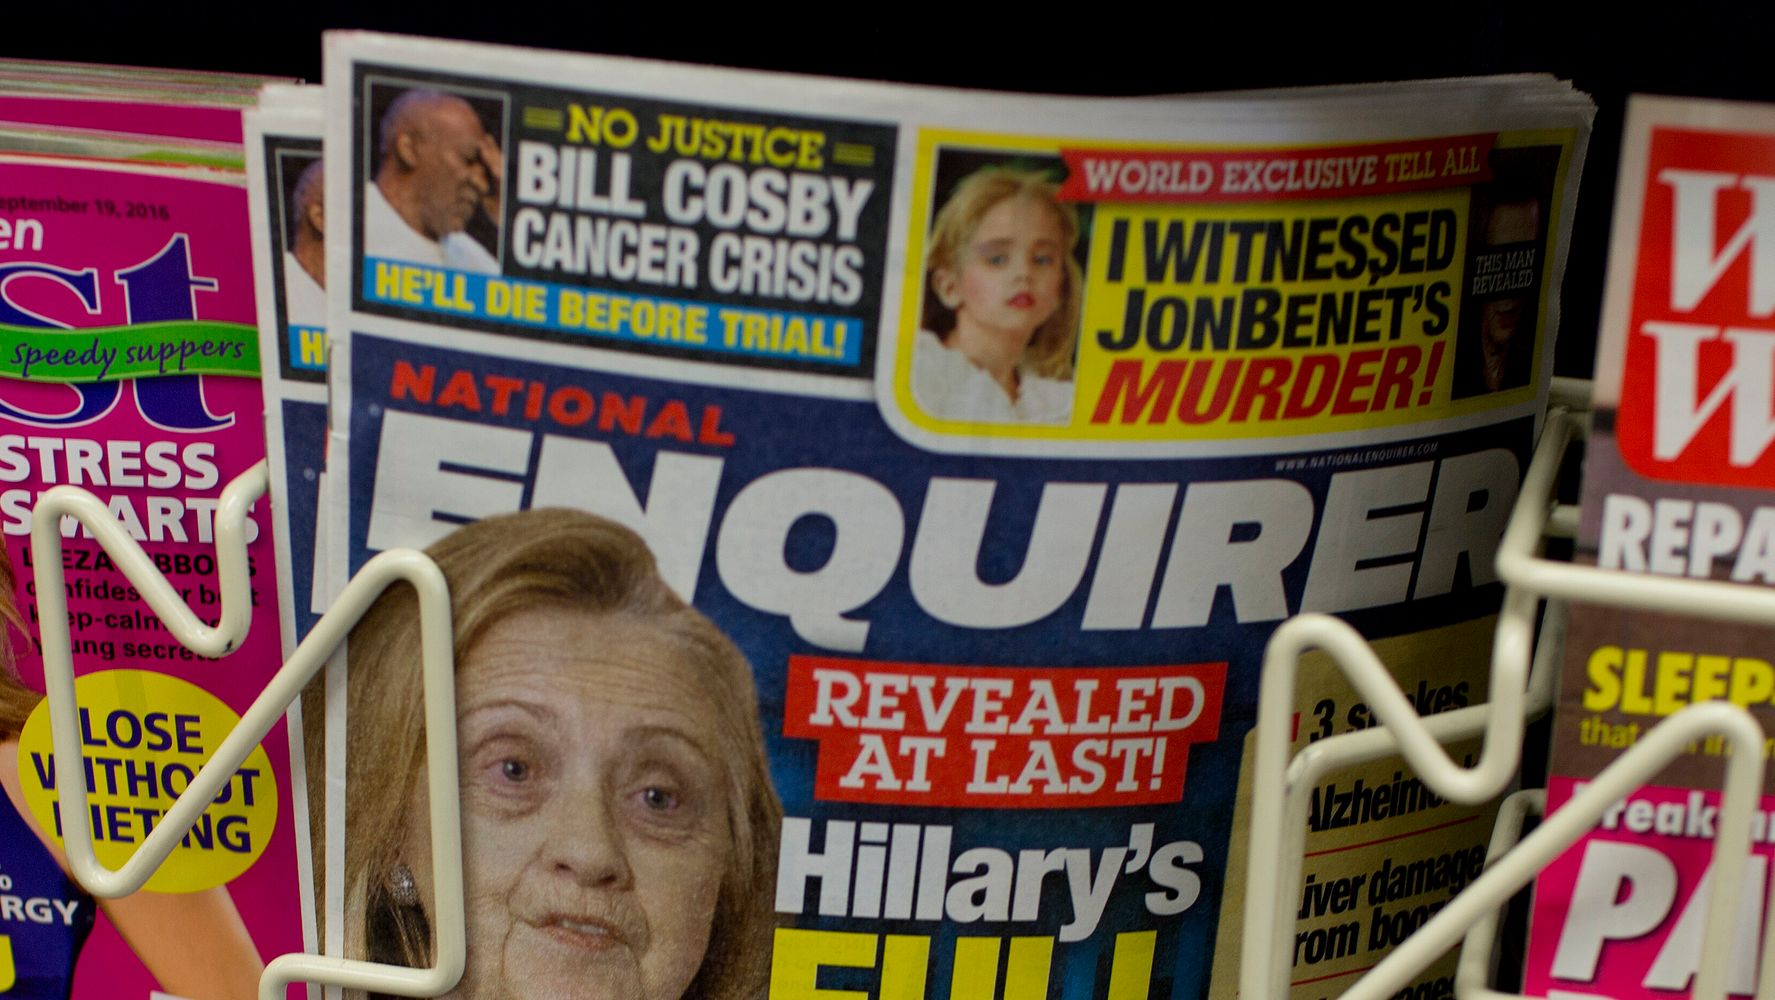 National Enquirer Agrees To Pay $187,500 For Breaking Election Law In 2016 To Help Trump